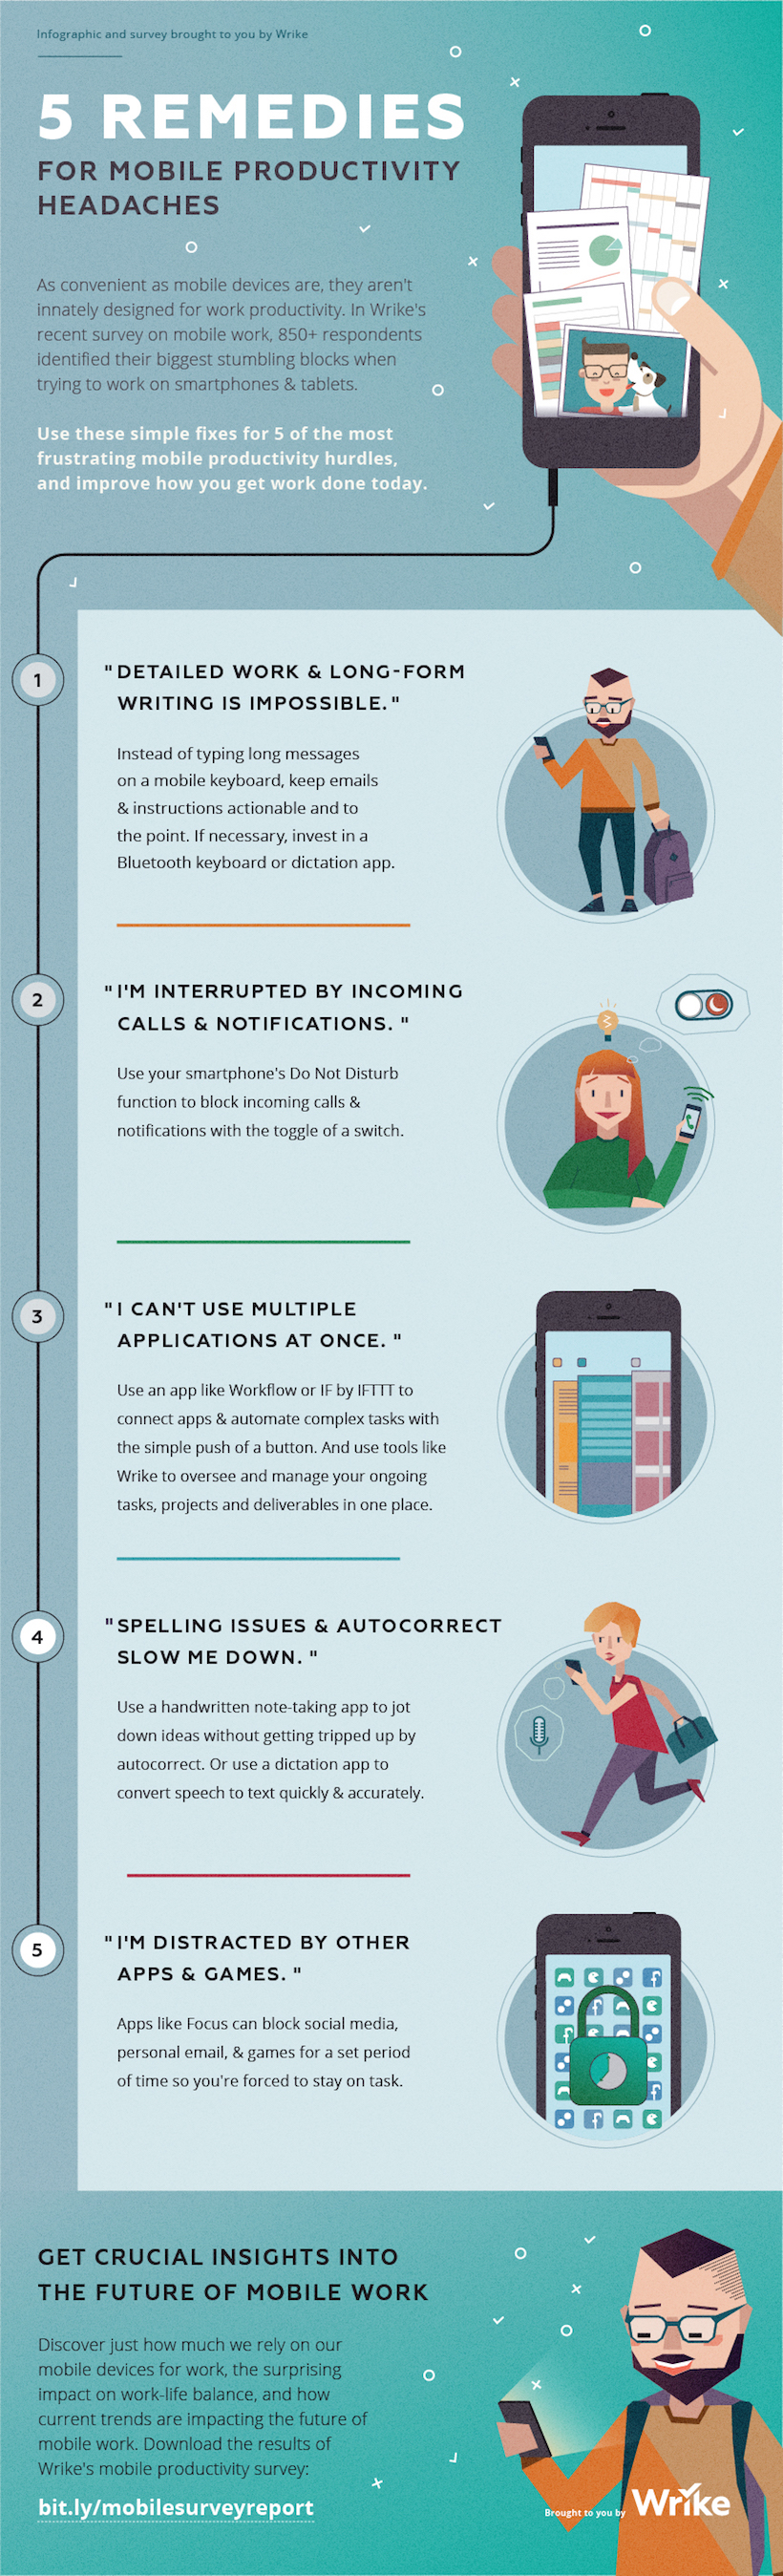 5 Remedies for Mobile Productivity Headaches (Infographic)